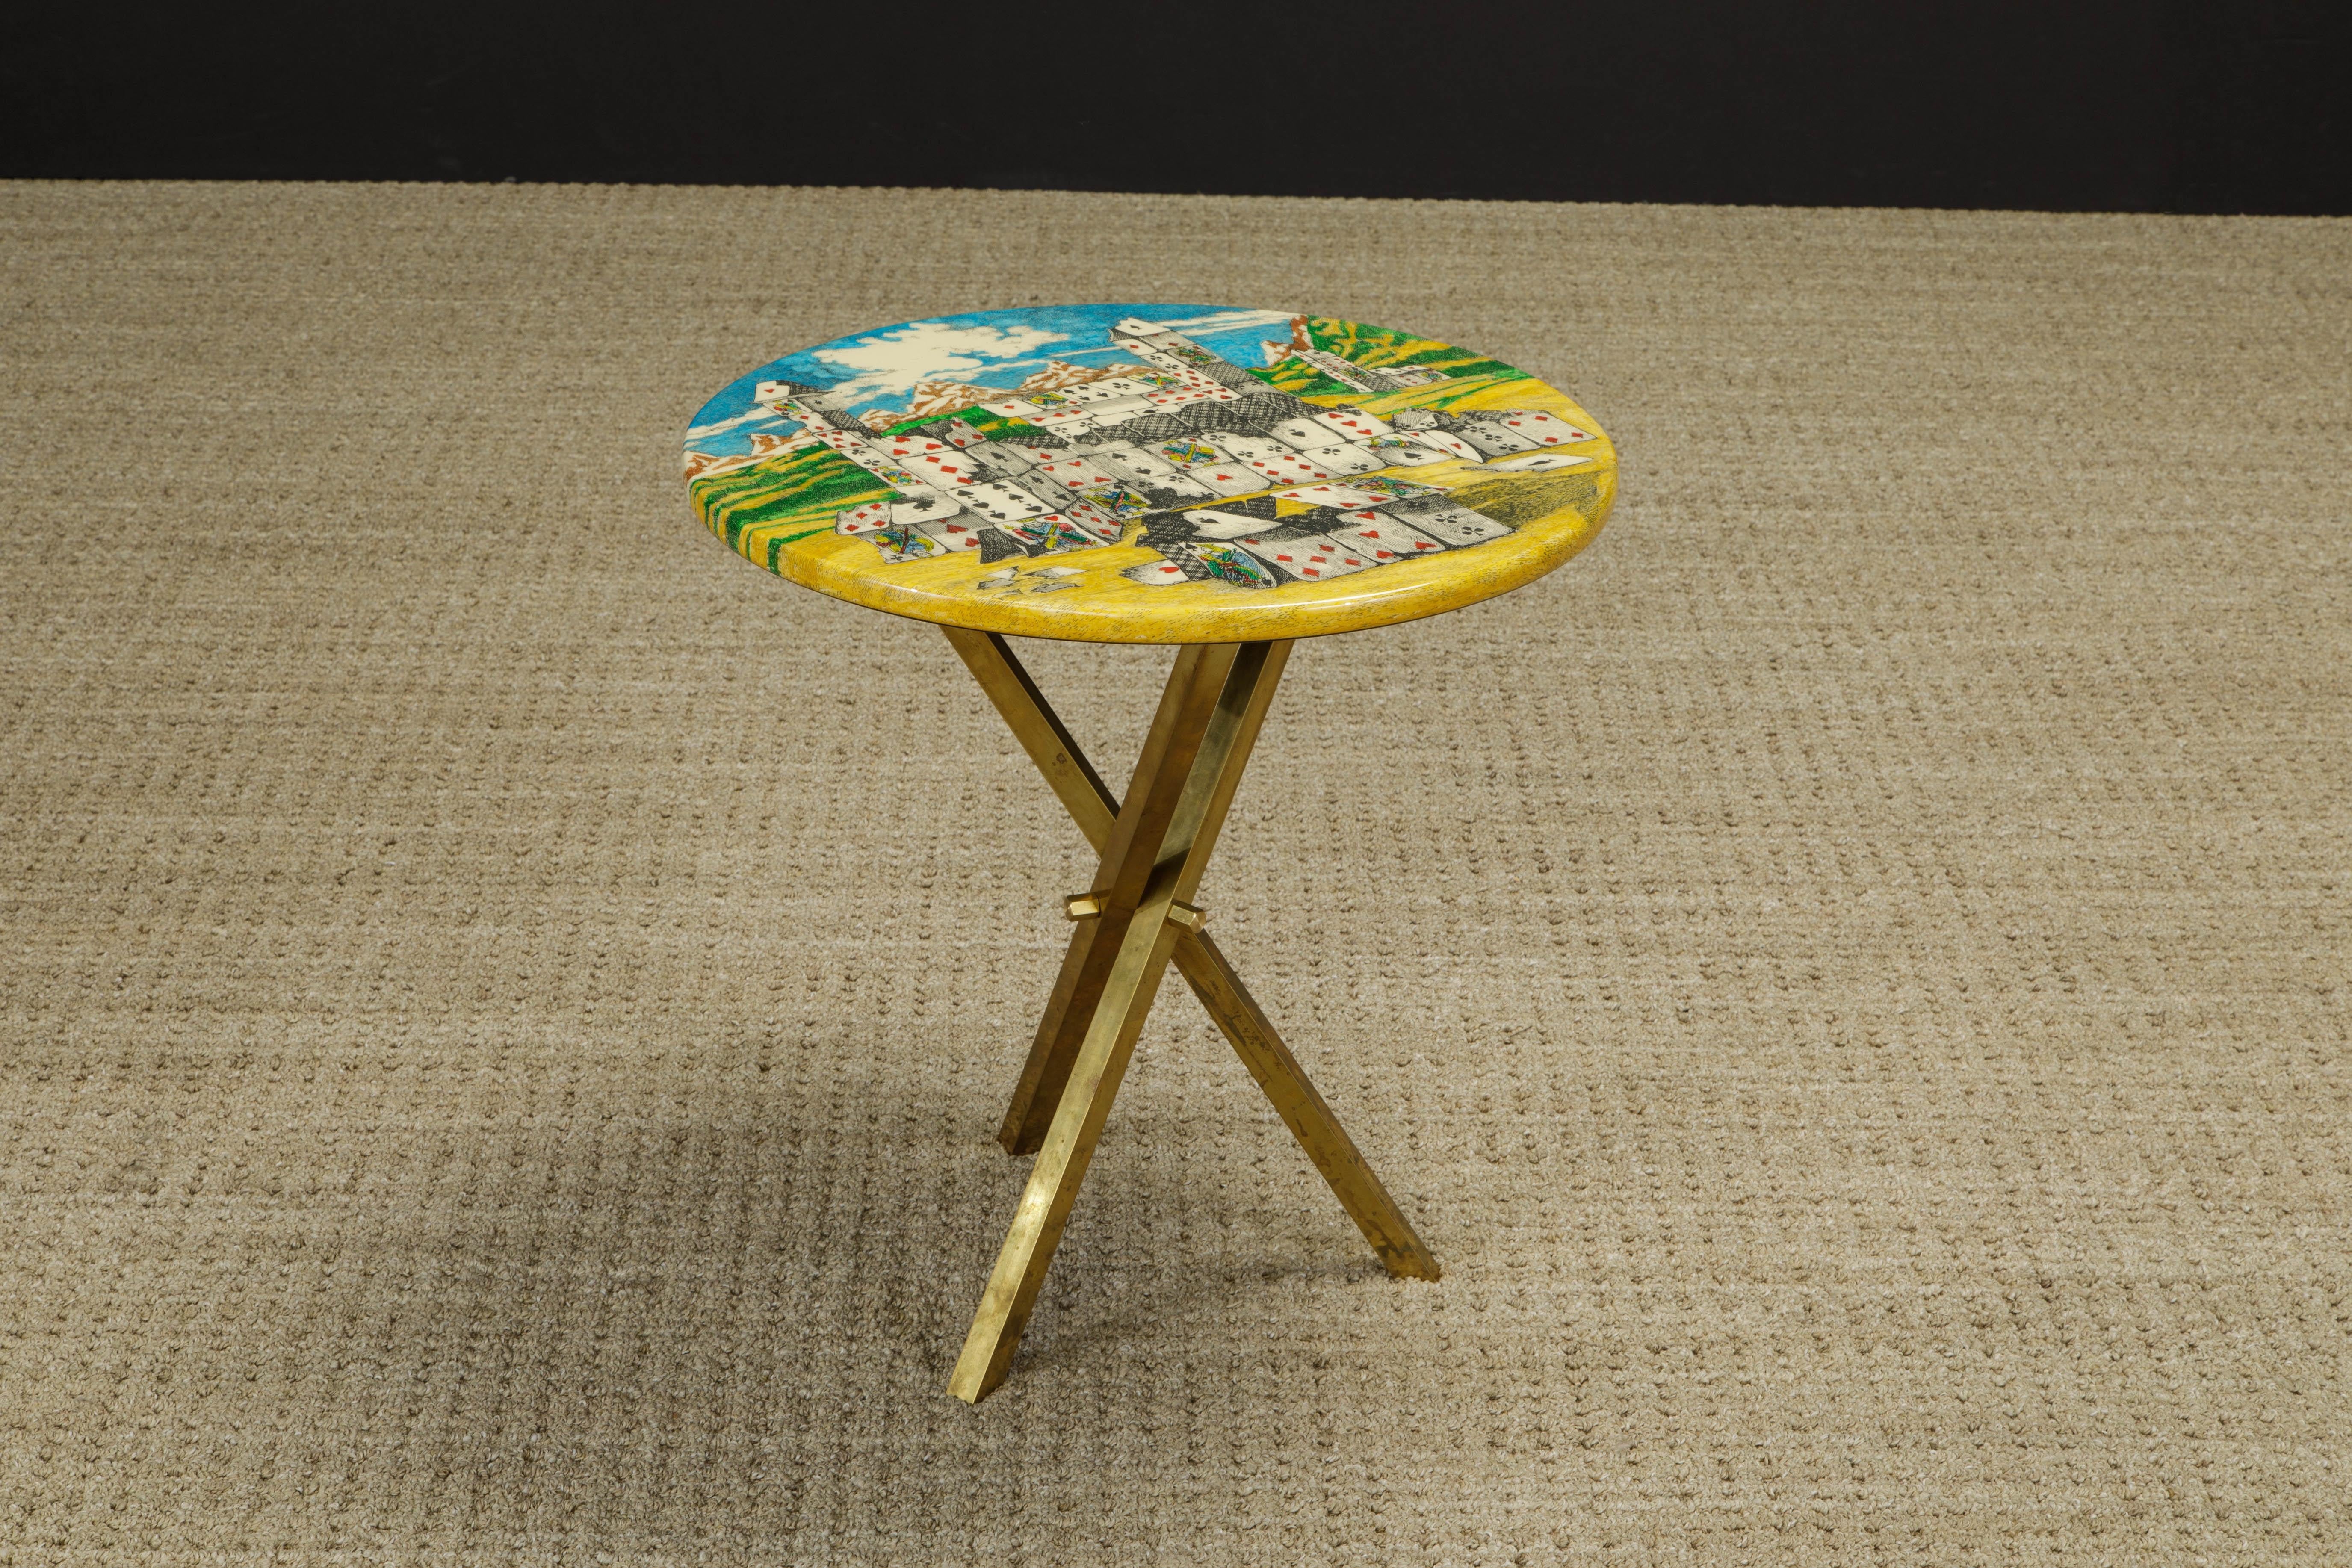 Lacquered Rare 'Città di Carte' (City of Cards) Side Table by Piero Fornasetti, Signed 